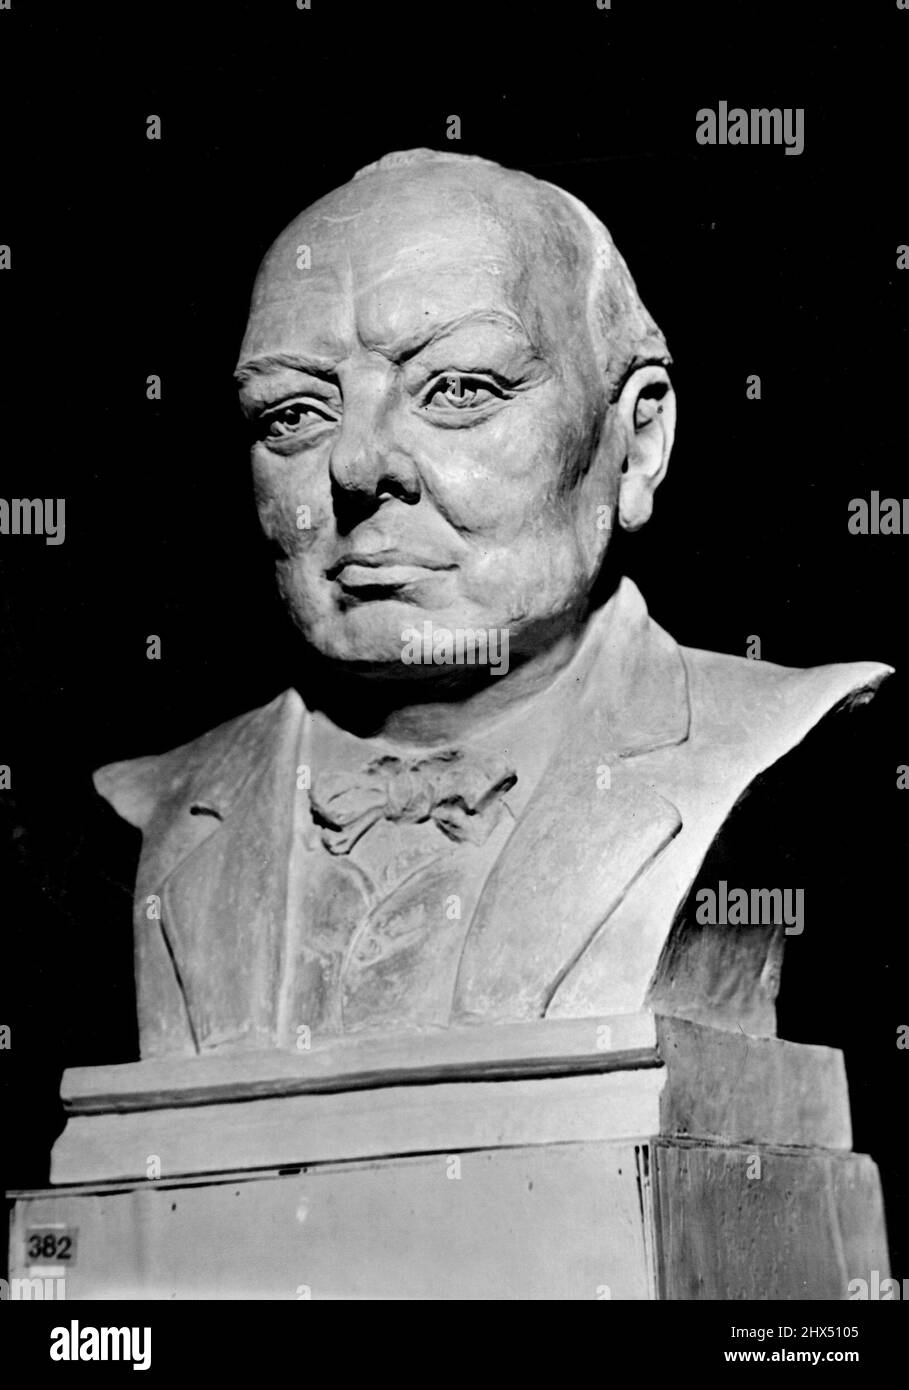 Royal Society Of British Artists Hold Winter Exhibition -- Called 'The Thinker', this head of Winston Churchill, is by Elsie March, R.B.A. and is exhibited at the Royal Society of British Artists Winter Exhibition at Suffolk st. galleries, Pall Mall. November 29, 1949. (Photo by FOX Photos). Stock Photo